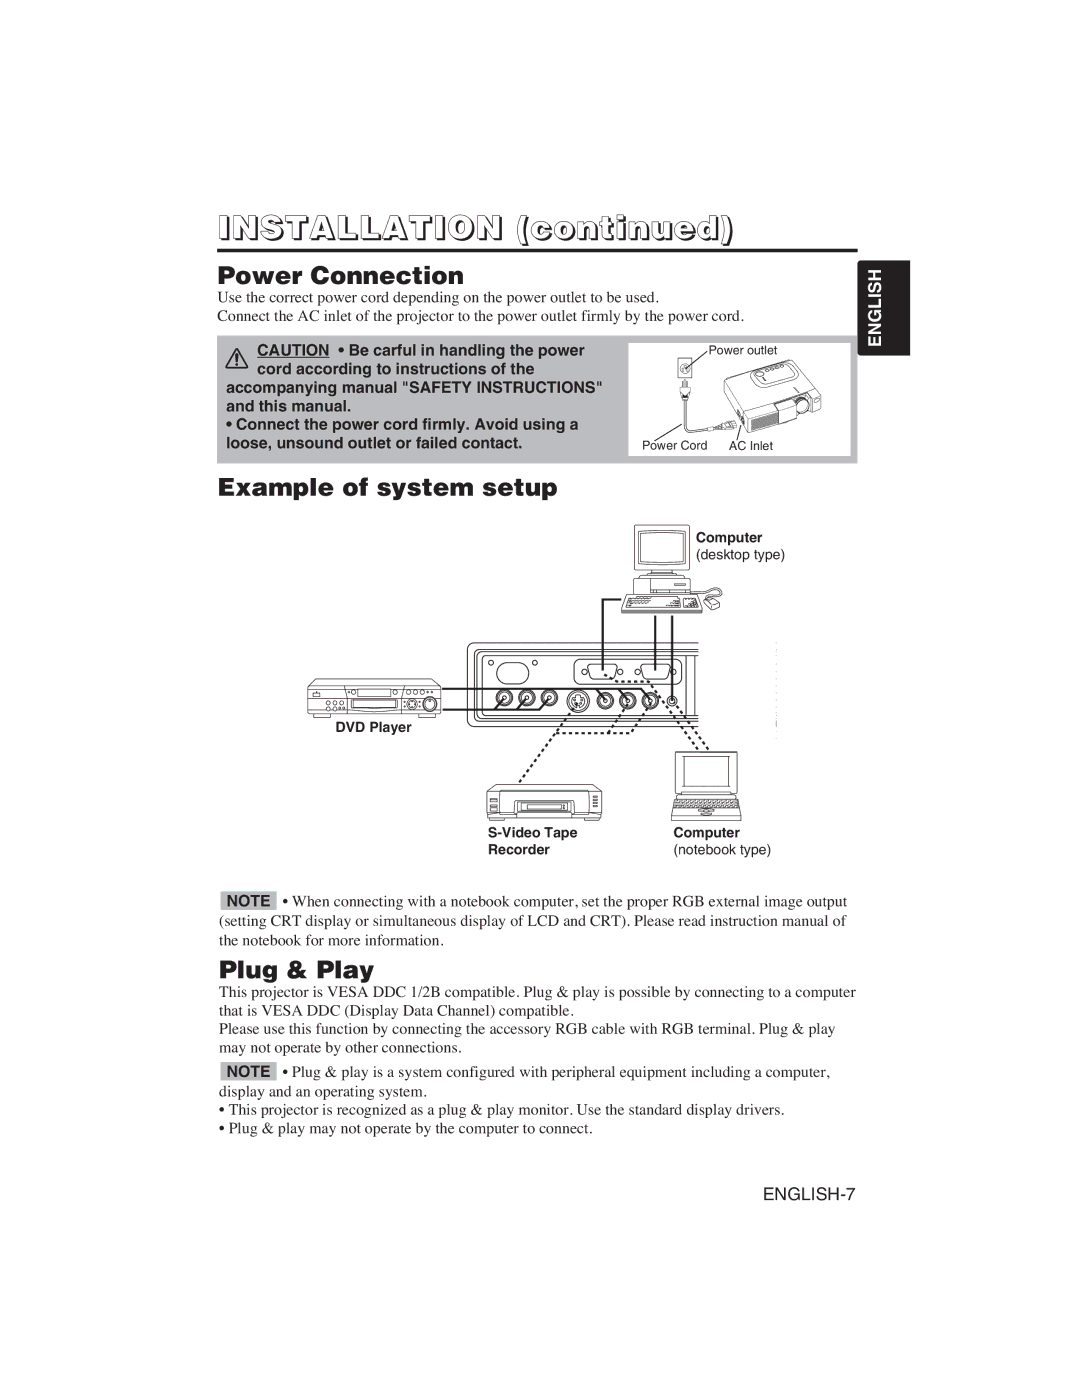 Hitachi CP-S225W, CP-X275W user manual Power Connection, Example of system setup, Plug & Play 